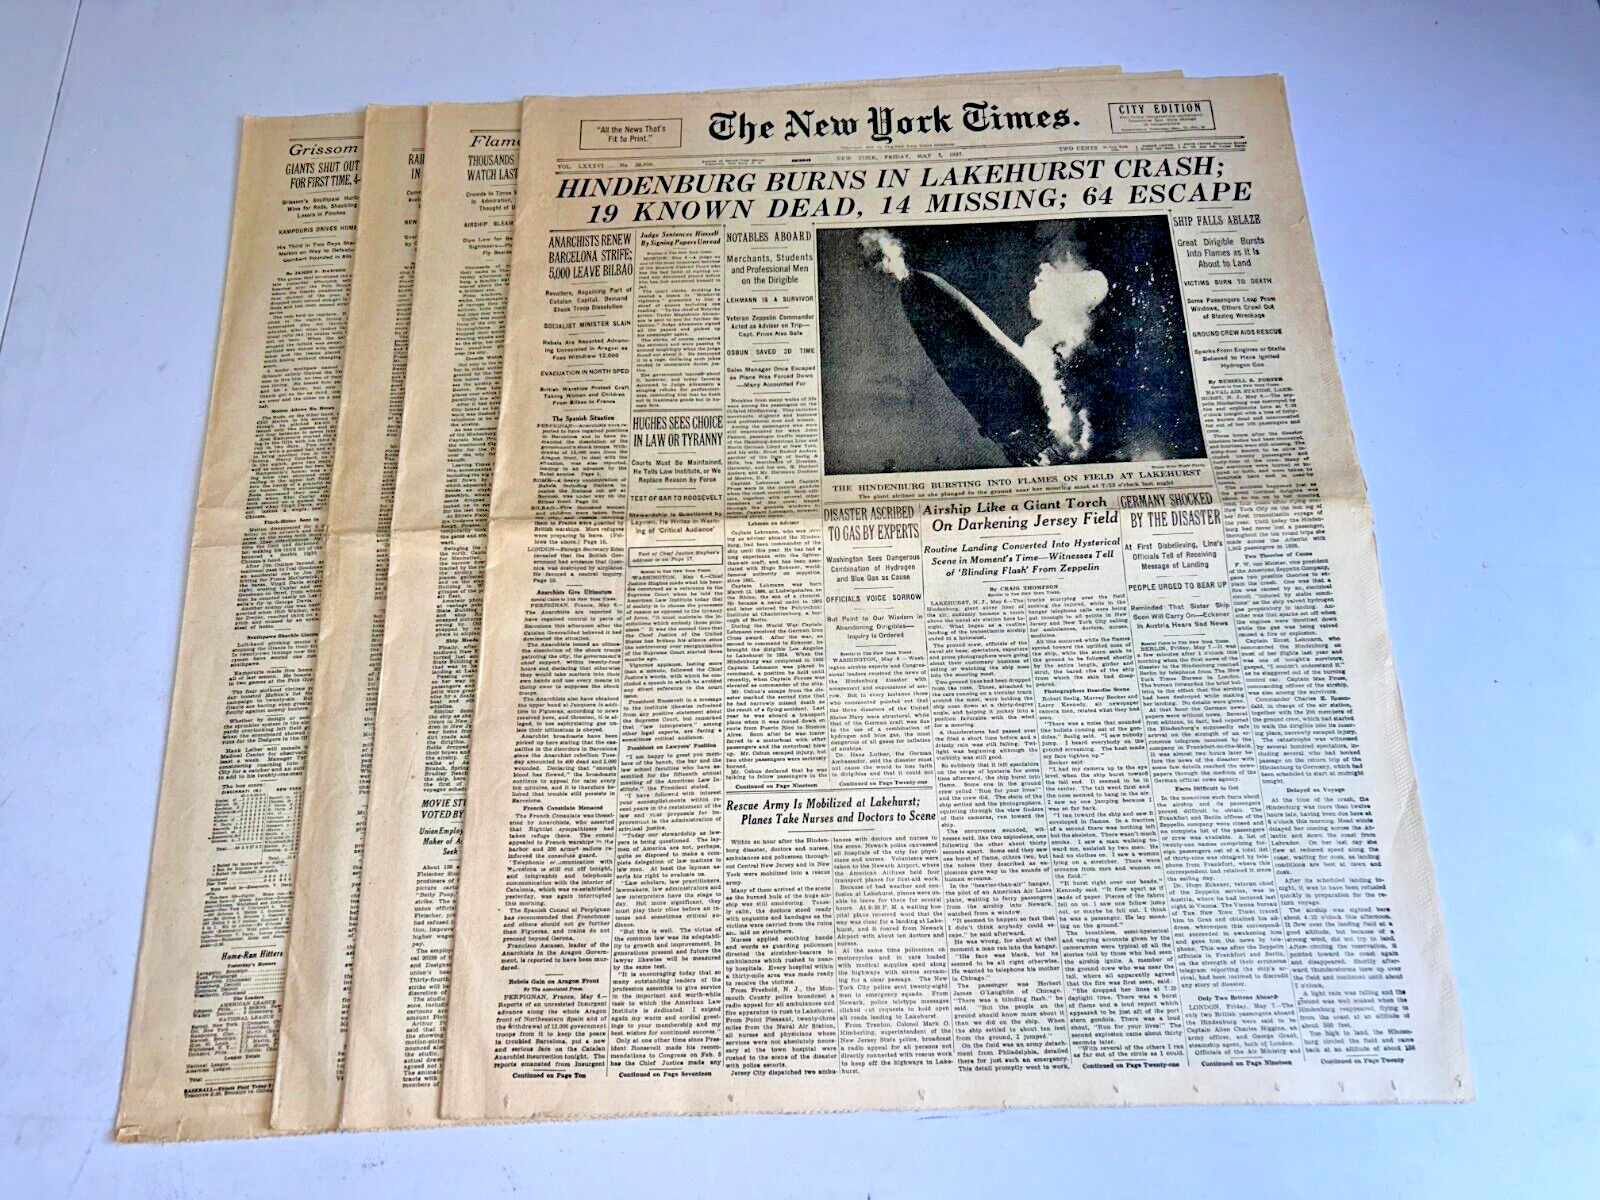 RARE The New York Times Newspaper Hindenburg Dated May 7, 1937 52 Pages Complete